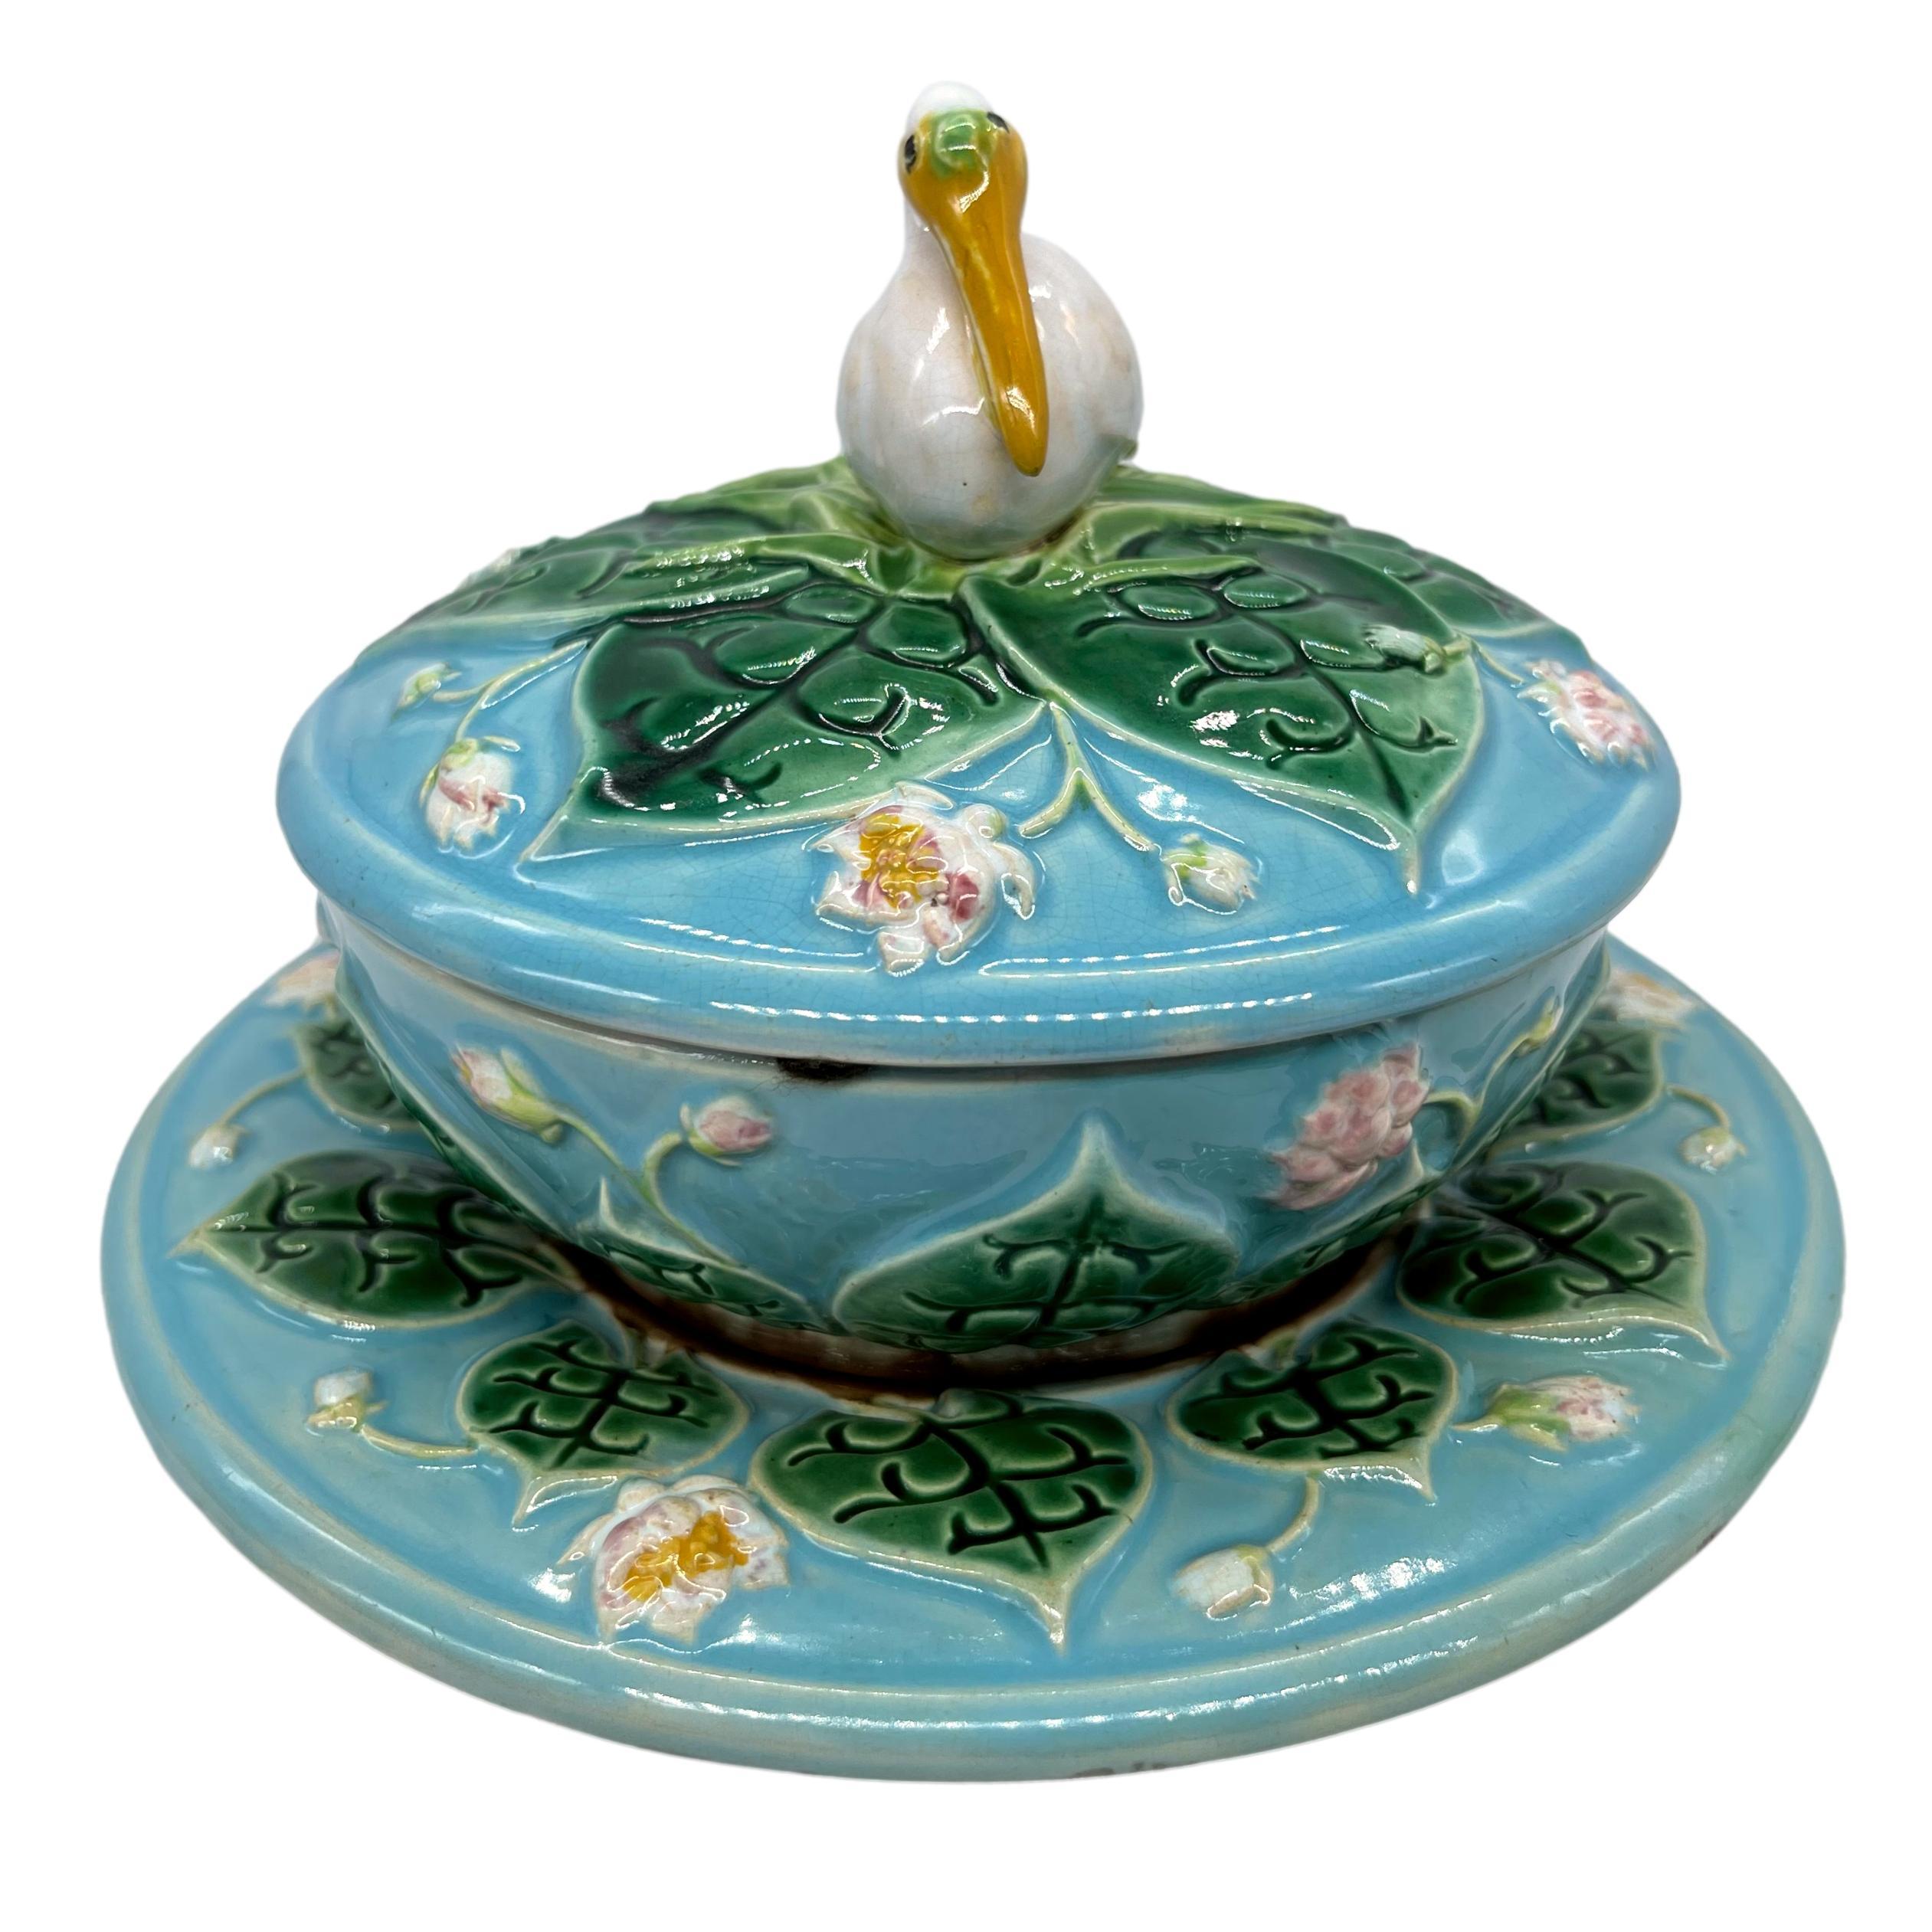 19th Century George Jones Majolica Pâté Server with Stand & Cover, 'Stork' Finial, Dated 1875